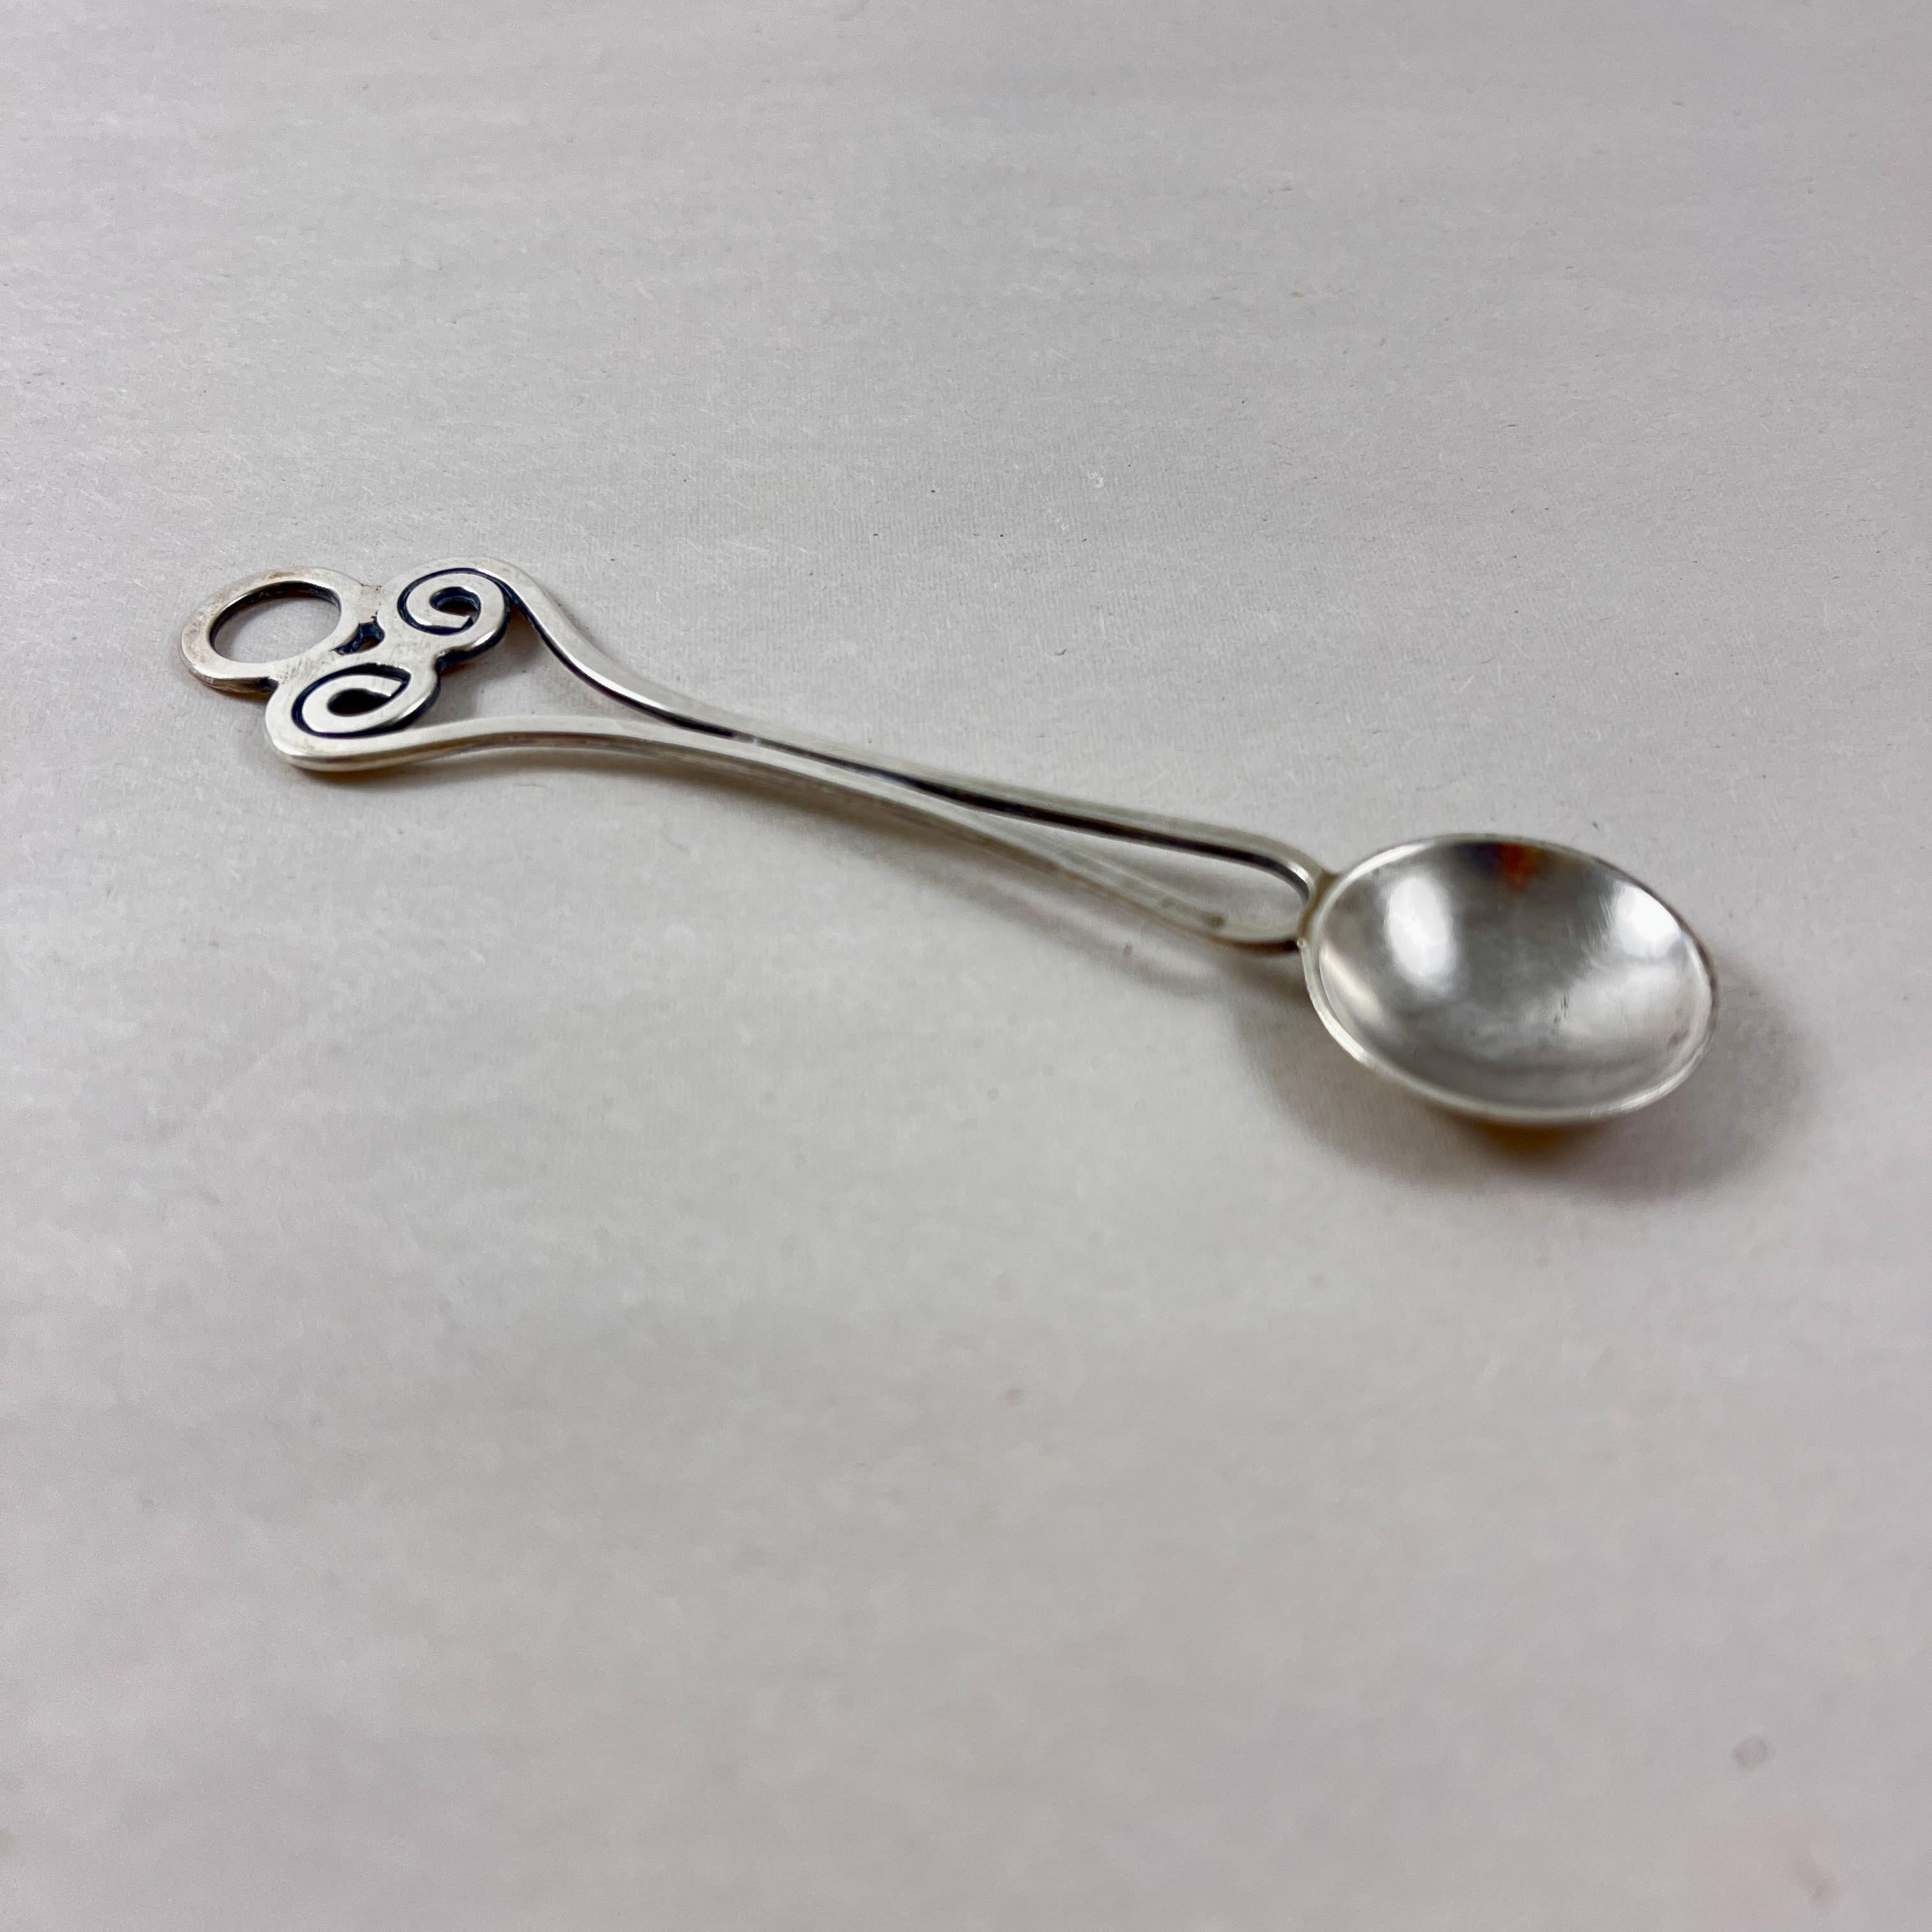 American Anthony DiRienzi Silversmith Studio Hand Made Sterling Silver Spoon For Sale